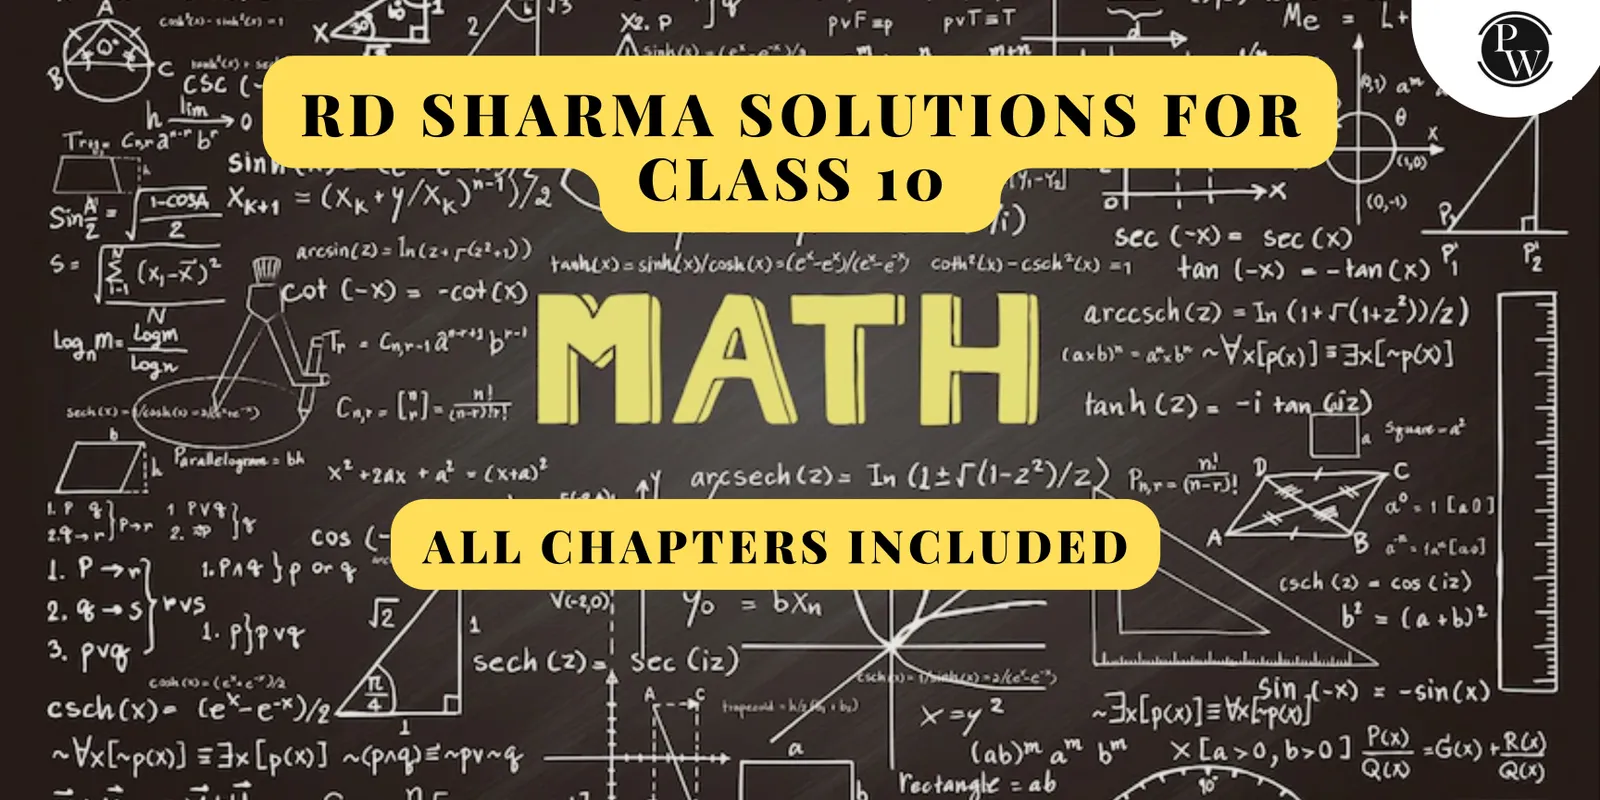 RD Sharma Solutions For Class 10 All Chapters Included